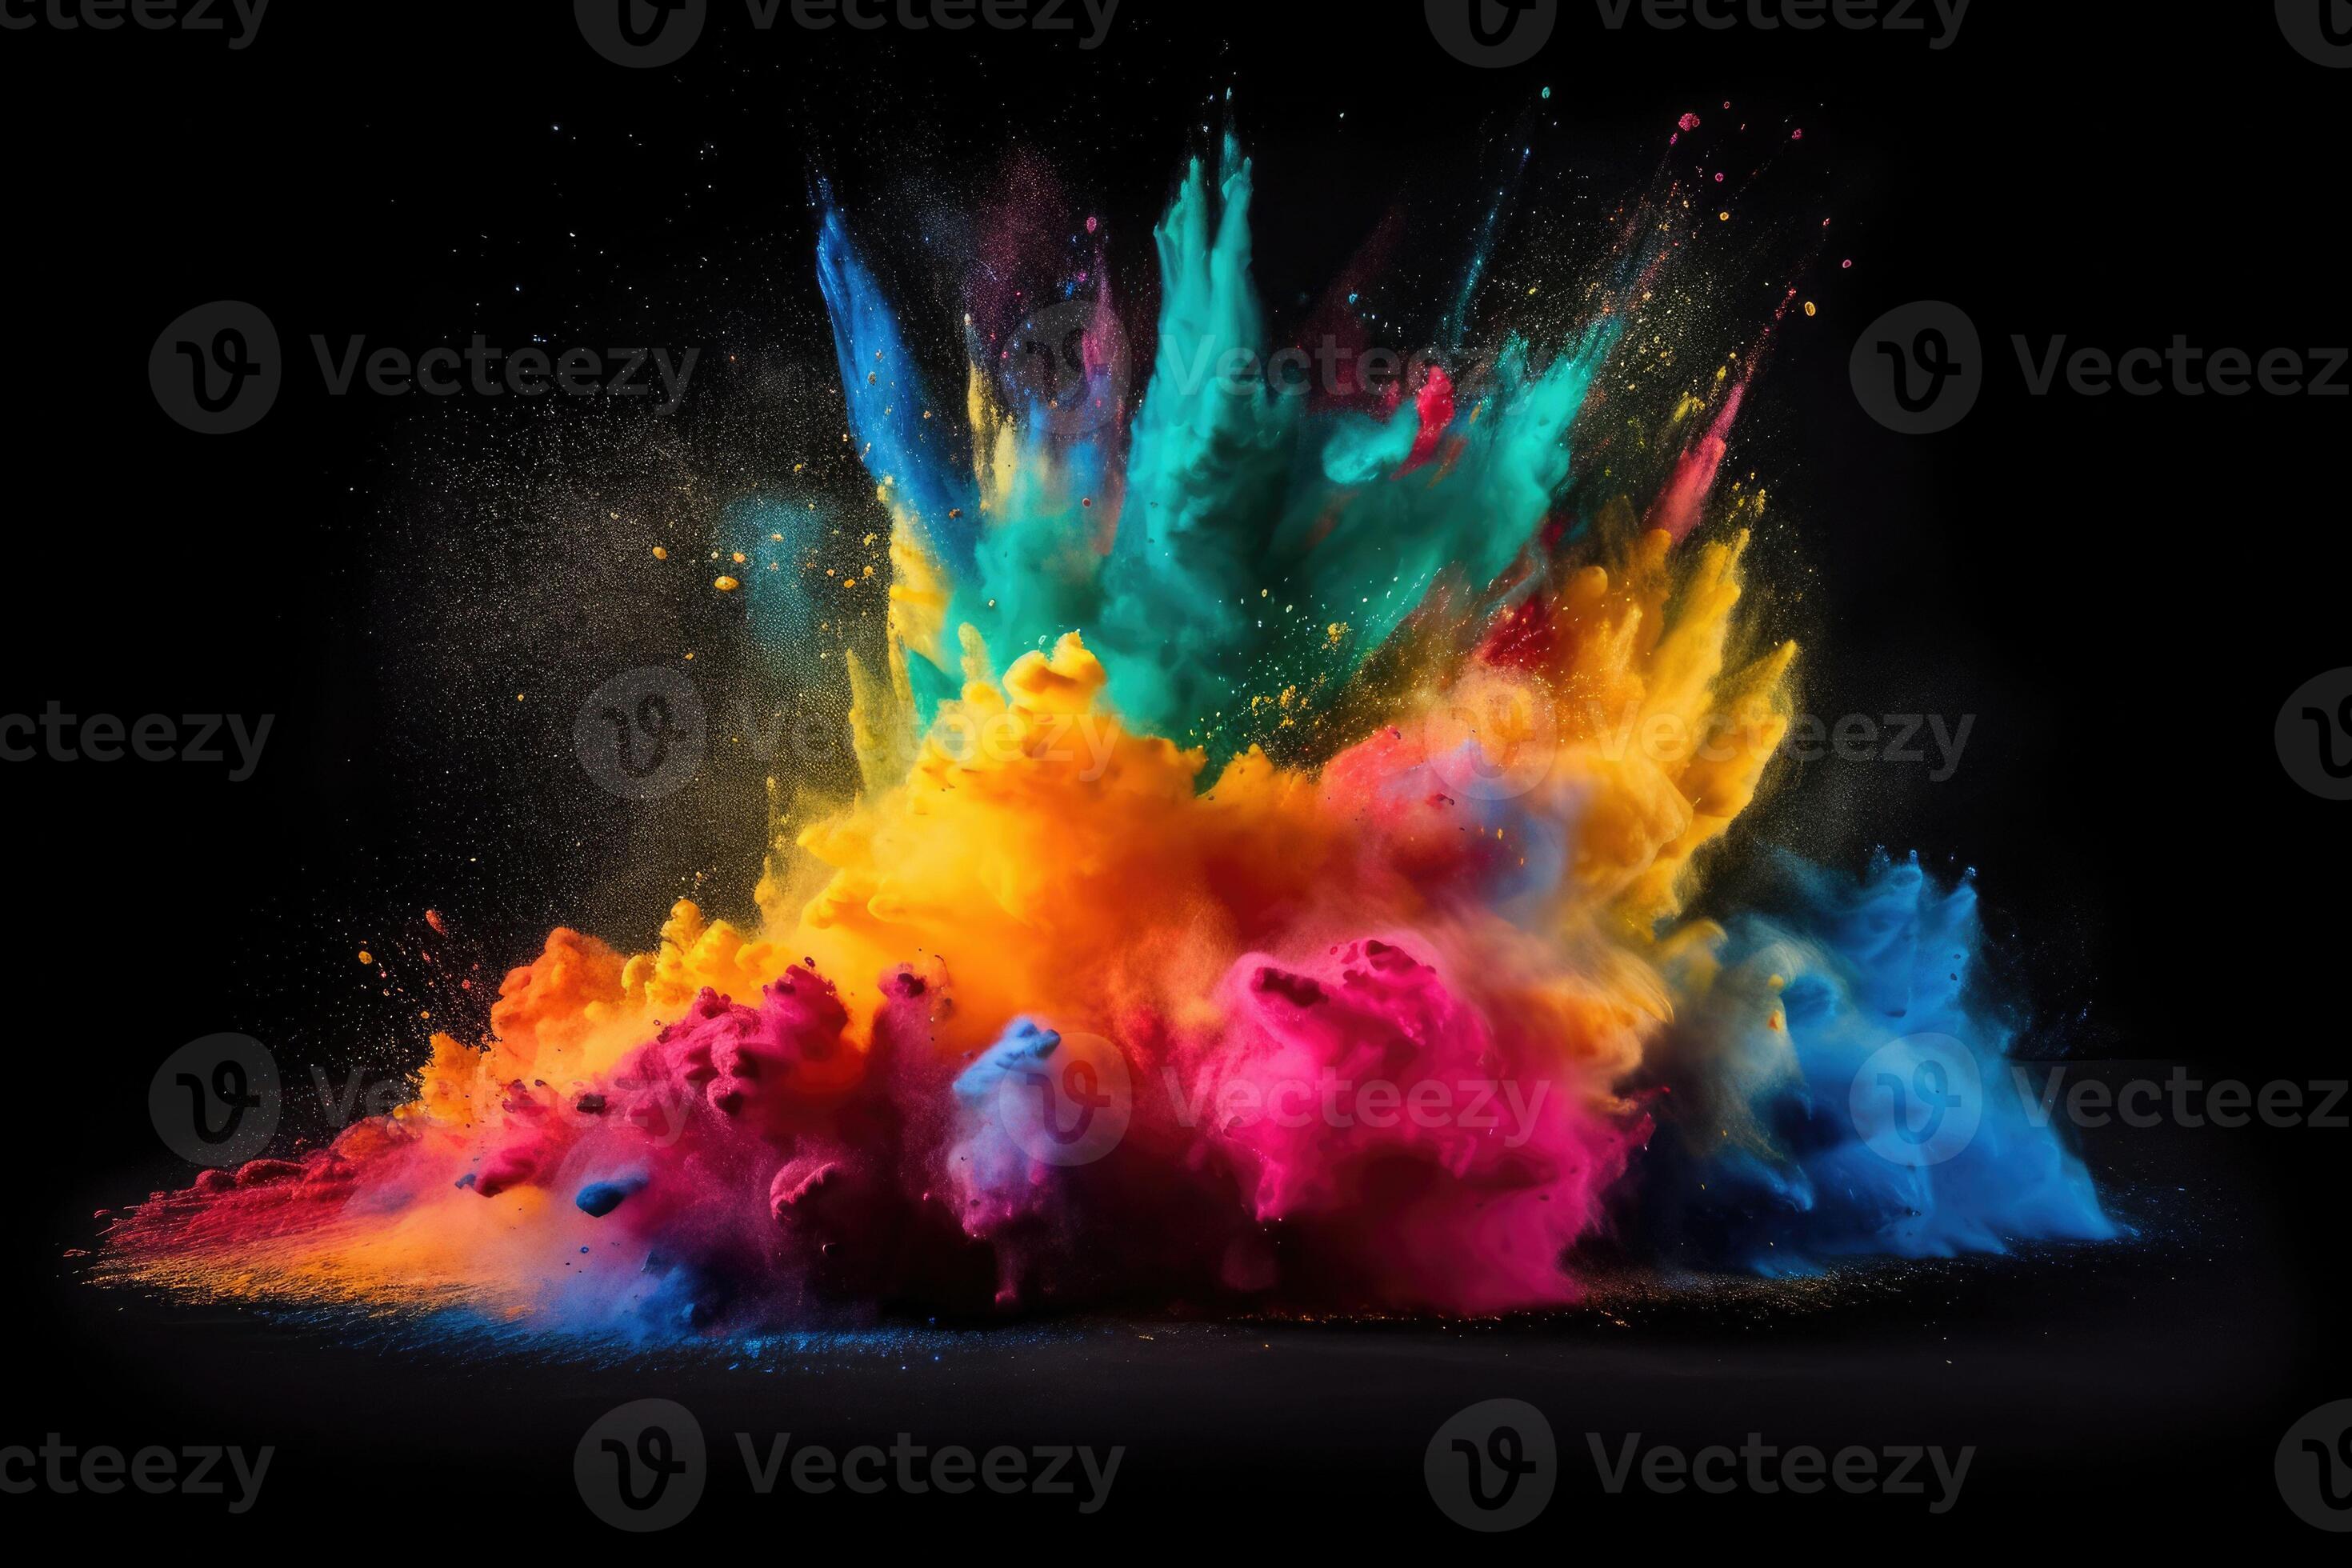 Holi Powder Blowing Up On Black Background Stock Photo - Download Image Now  - Abstract, Ash, Backgrounds - iStock